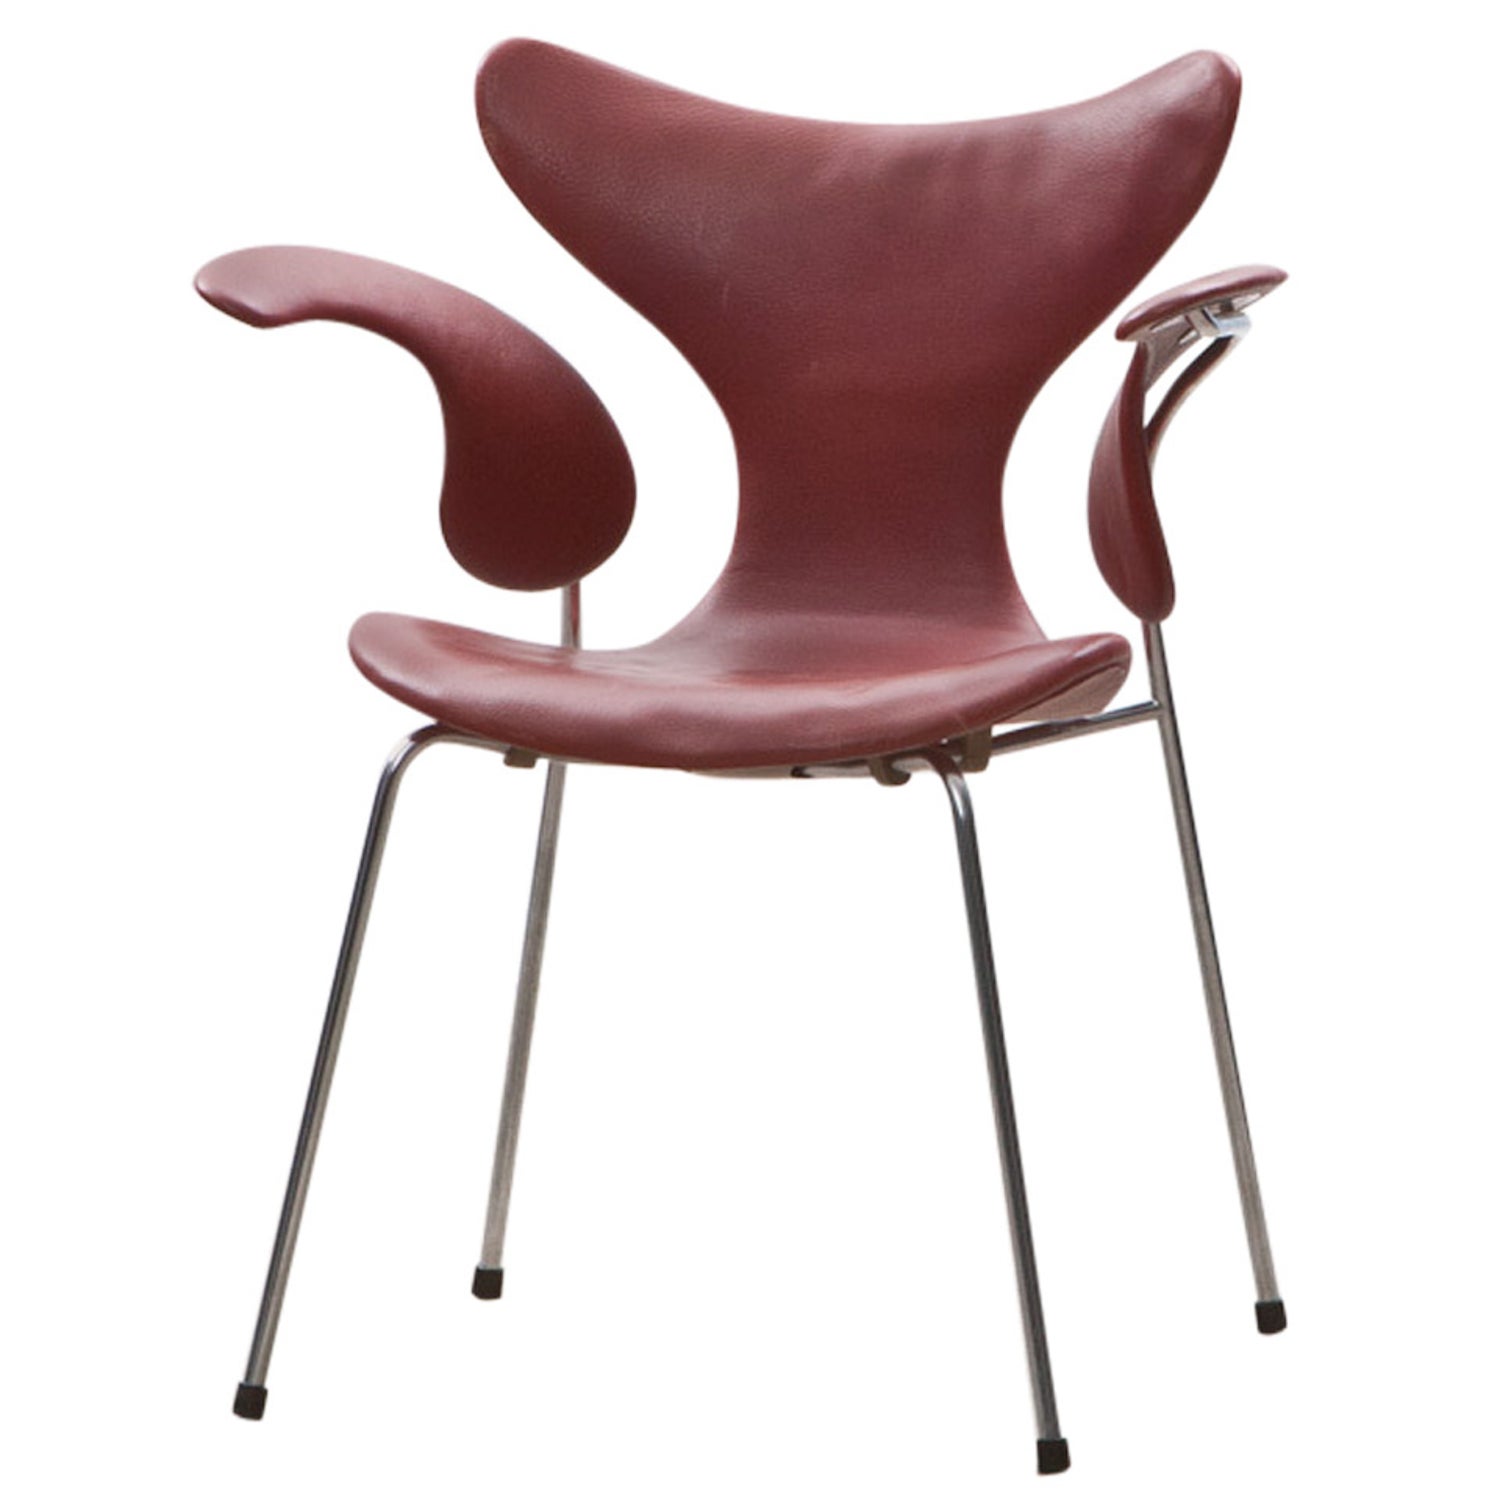 1960's red leather Arne Jacobsen "Seagull" Chair For Sale at 1stDibs